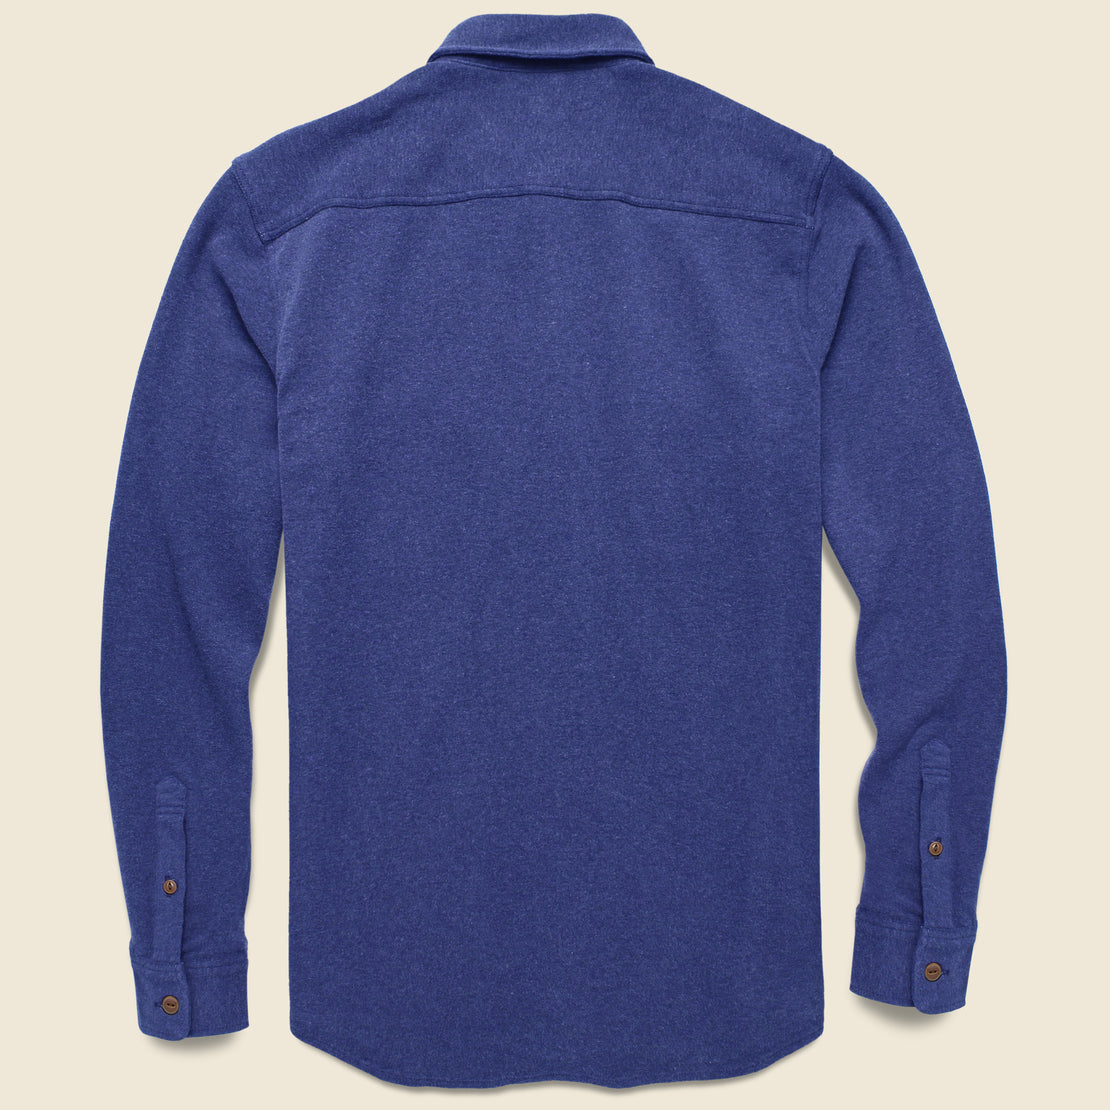 Knit Alpine Shirt - Bright Blue - Faherty - STAG Provisions - Tops - L/S Woven - Solid